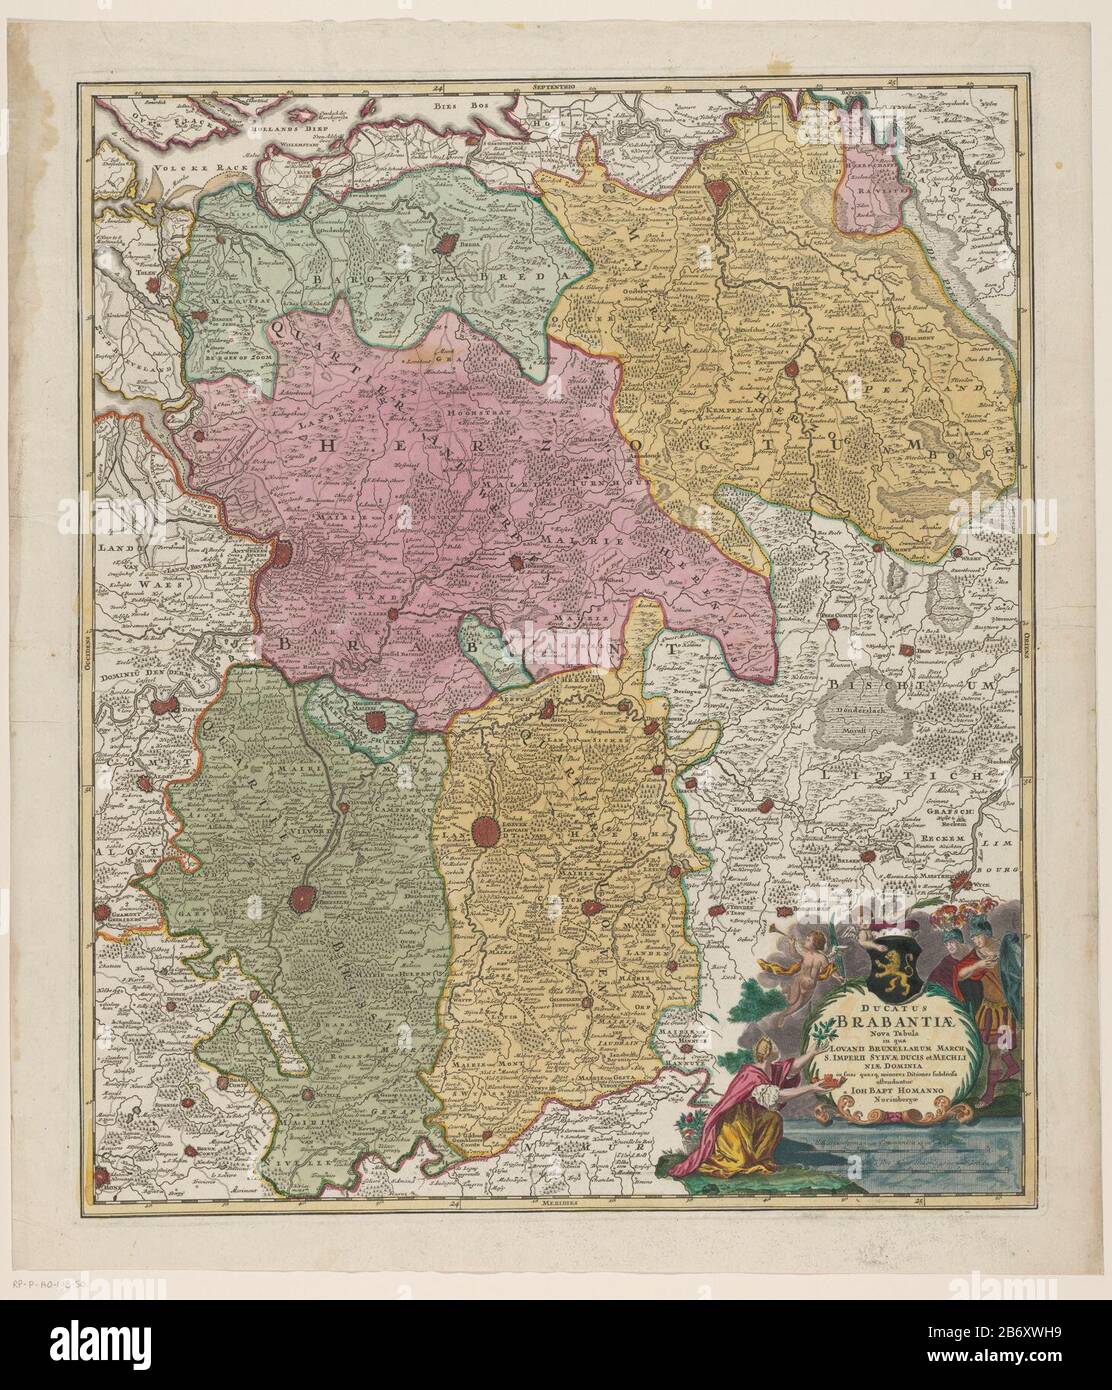 Kaart van het hertogdom Brabant Ducatus Brabantiae nova tabula in qua Lovanii Bruxellarum (titel op object) Map of the Duchy of Brabant. Right Under the title cartouche above the arms of the Duchy of Brabant and scale under two poles: Milli Aria Germanica Communia 15 in uno Graduation / Milli Aria Gallica sive Horae Itineris 20 in uno Graduation. The card has a degree distribution along the randen. Manufacturer : printmaker: anonymous editor: Johann Baptista Homann (listed property) Place manufacture: Nuremberg Date: 1674 - 1724 Physical features: engra, hand-colored material: paper Technique: Stock Photo